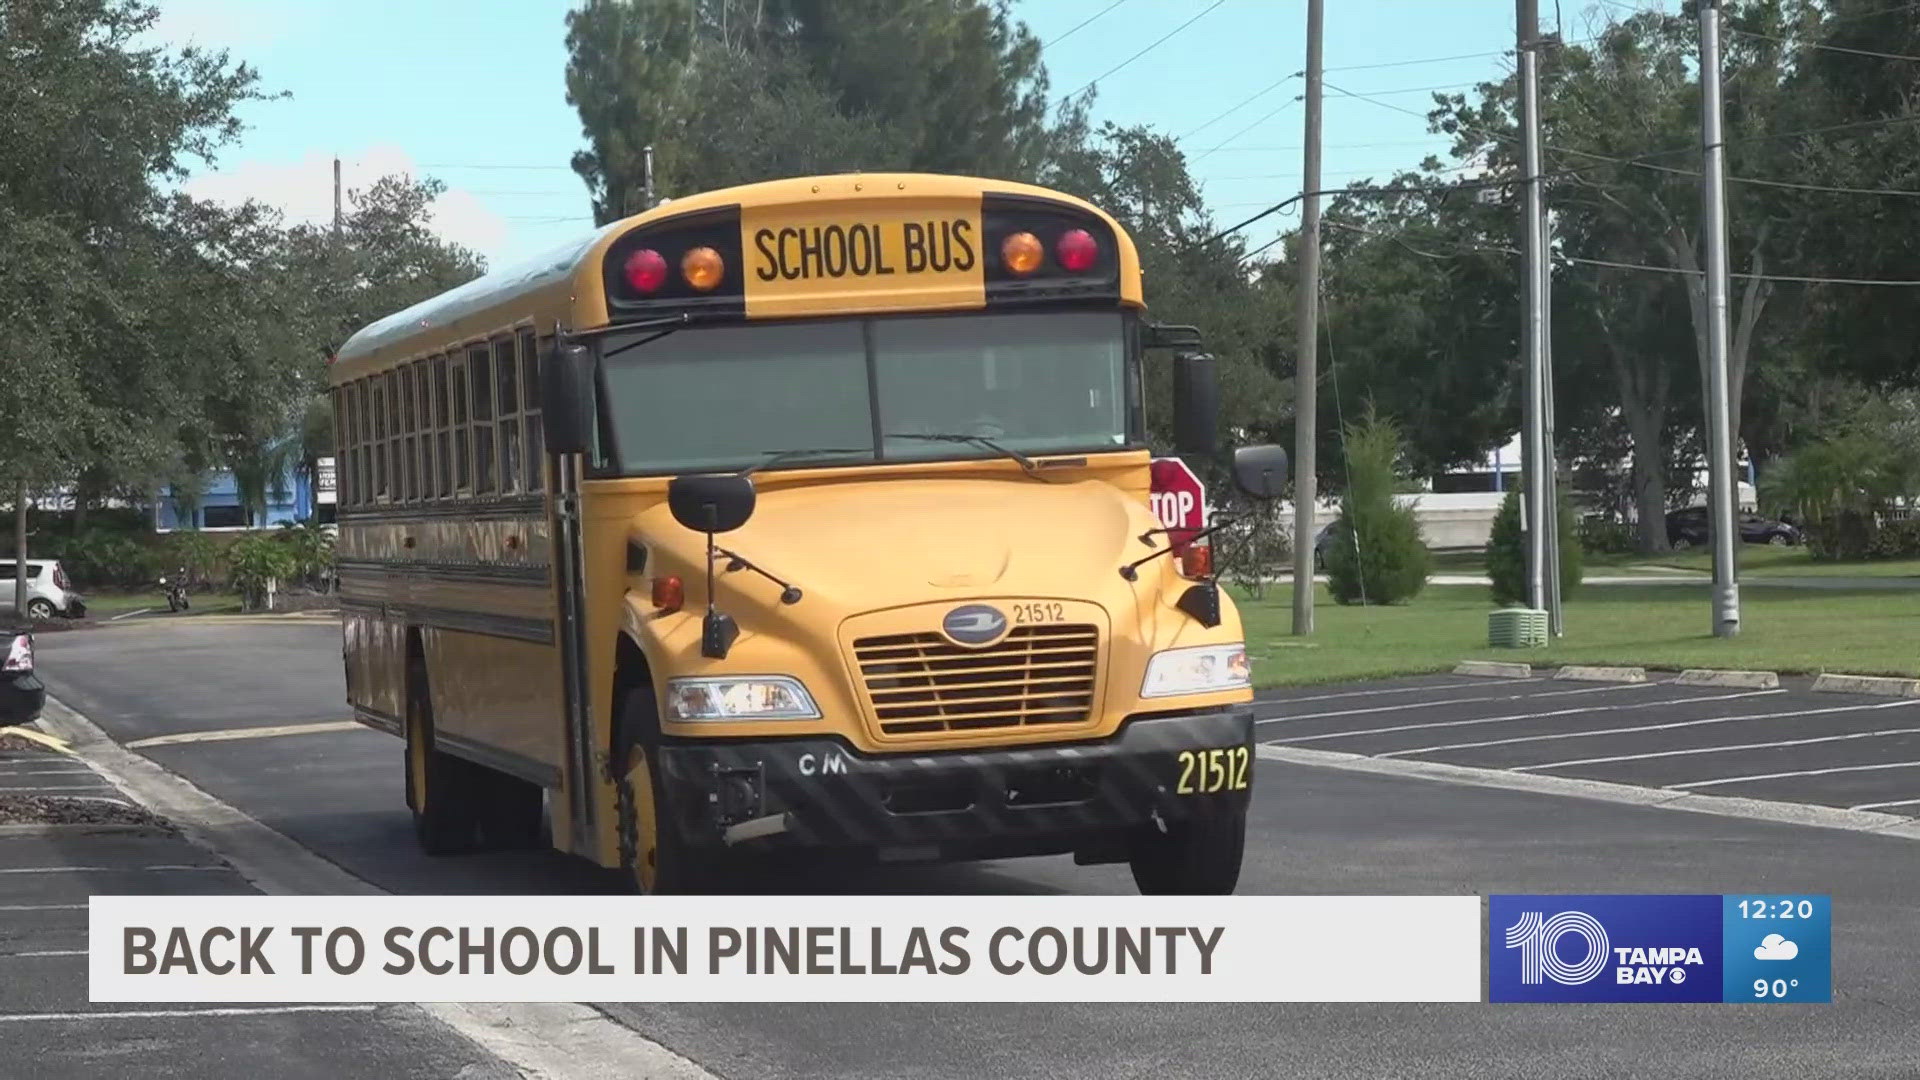 Hillsborough still needs more than 100 bus drivers for the school year, and the districts are increasing class sizes to brace for higher volumes of students.